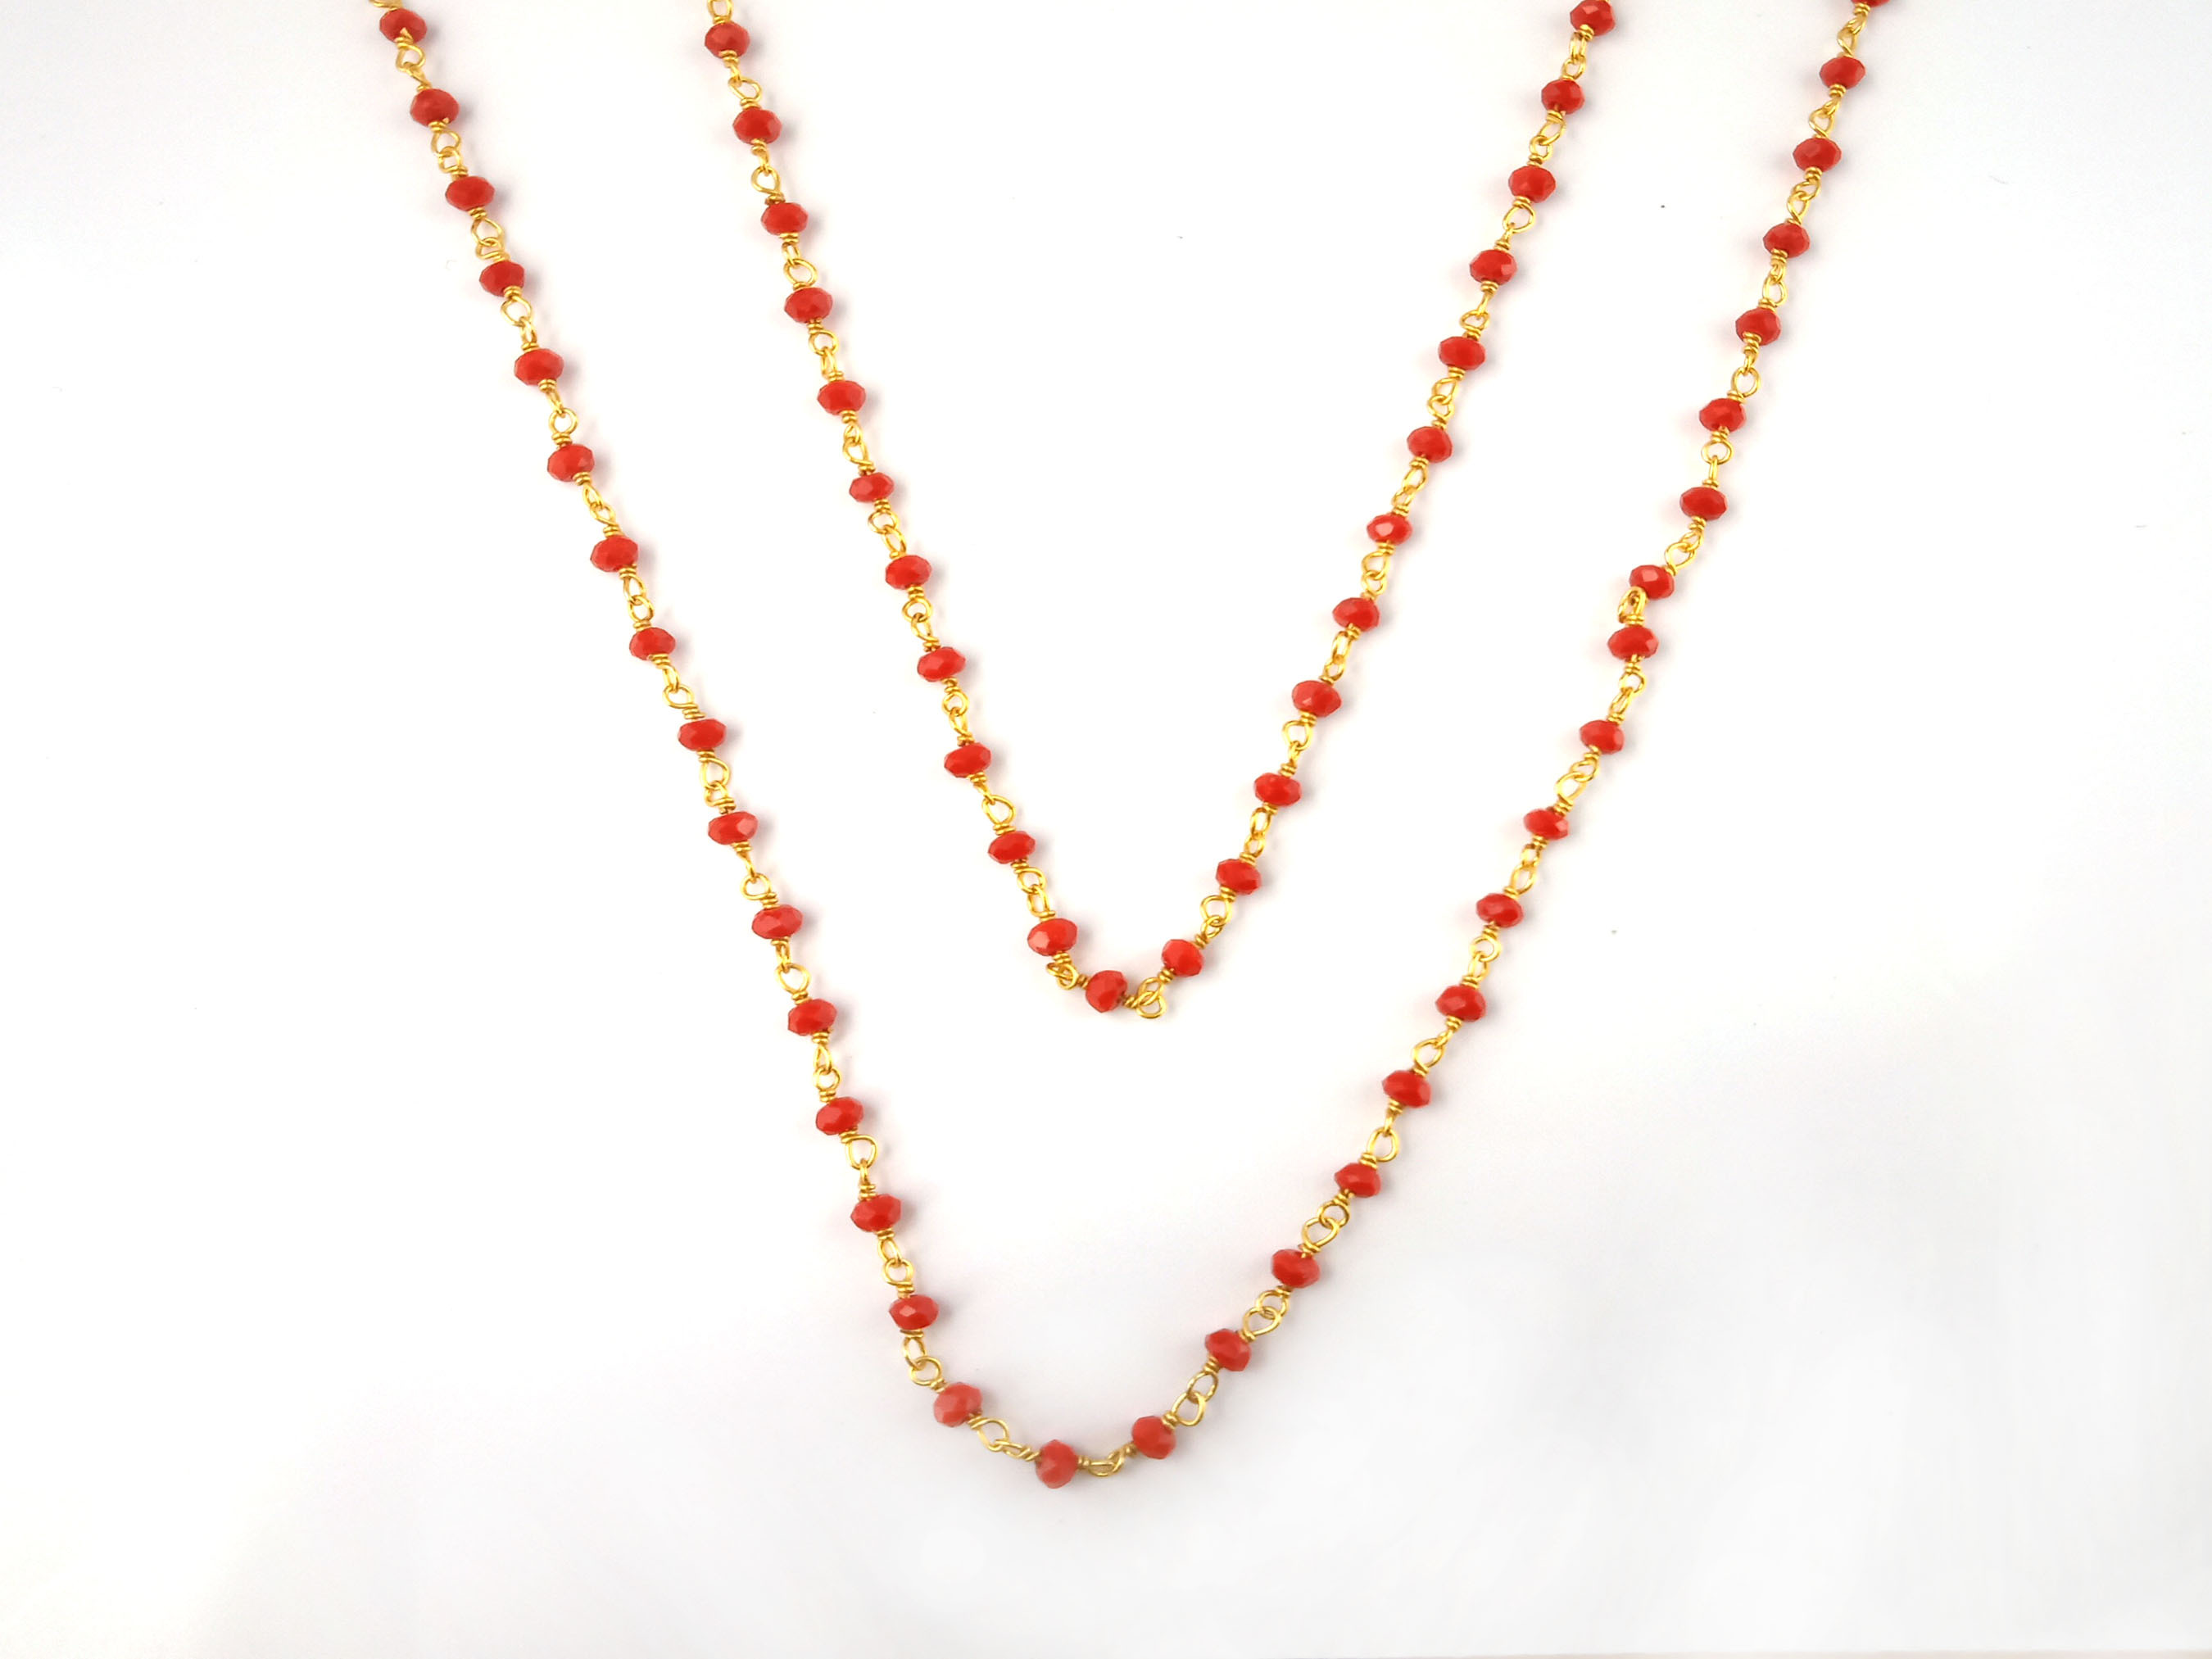 Red Coral Beaded Chain 2-2.5mm Wire Wrapped Rosary - Red Rosary Beaded Rosary Chain - Coral Beaded Chain Jewelry